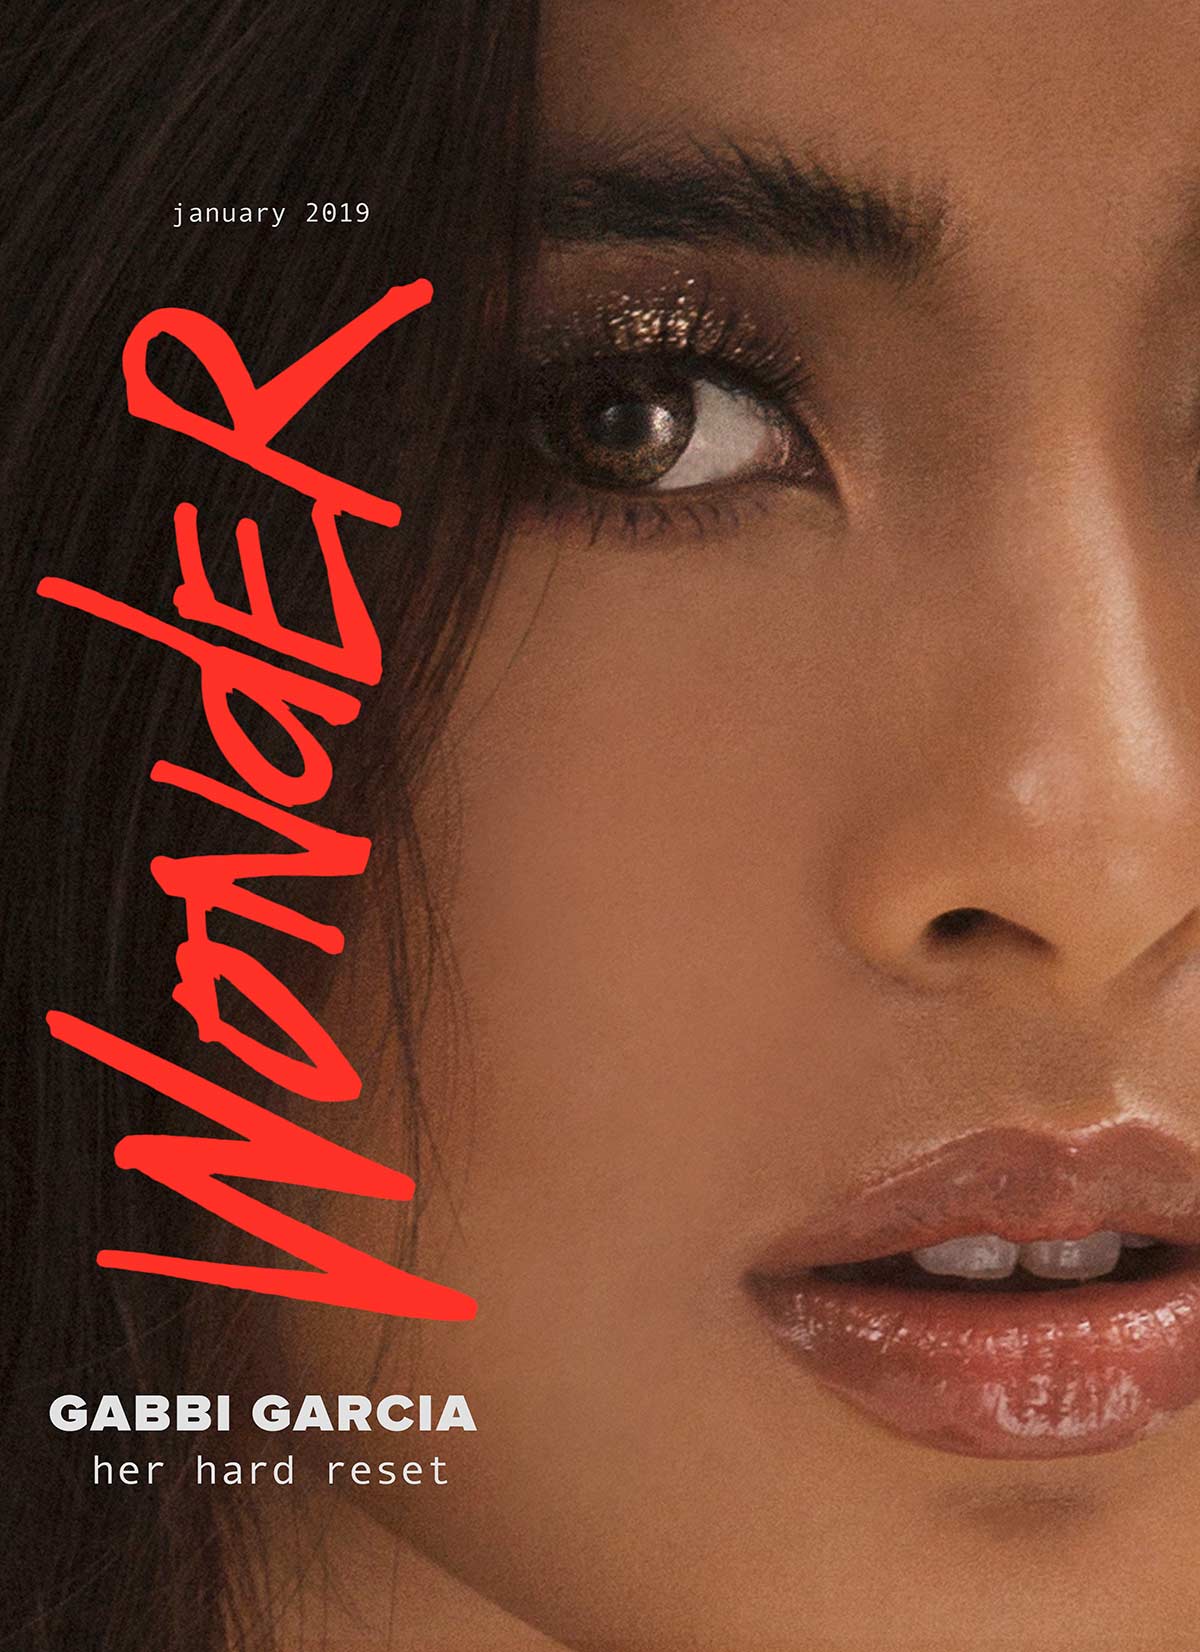 Her Hard Reset: Gabbi Garcia Is Stepping Out In A Big Way This Way